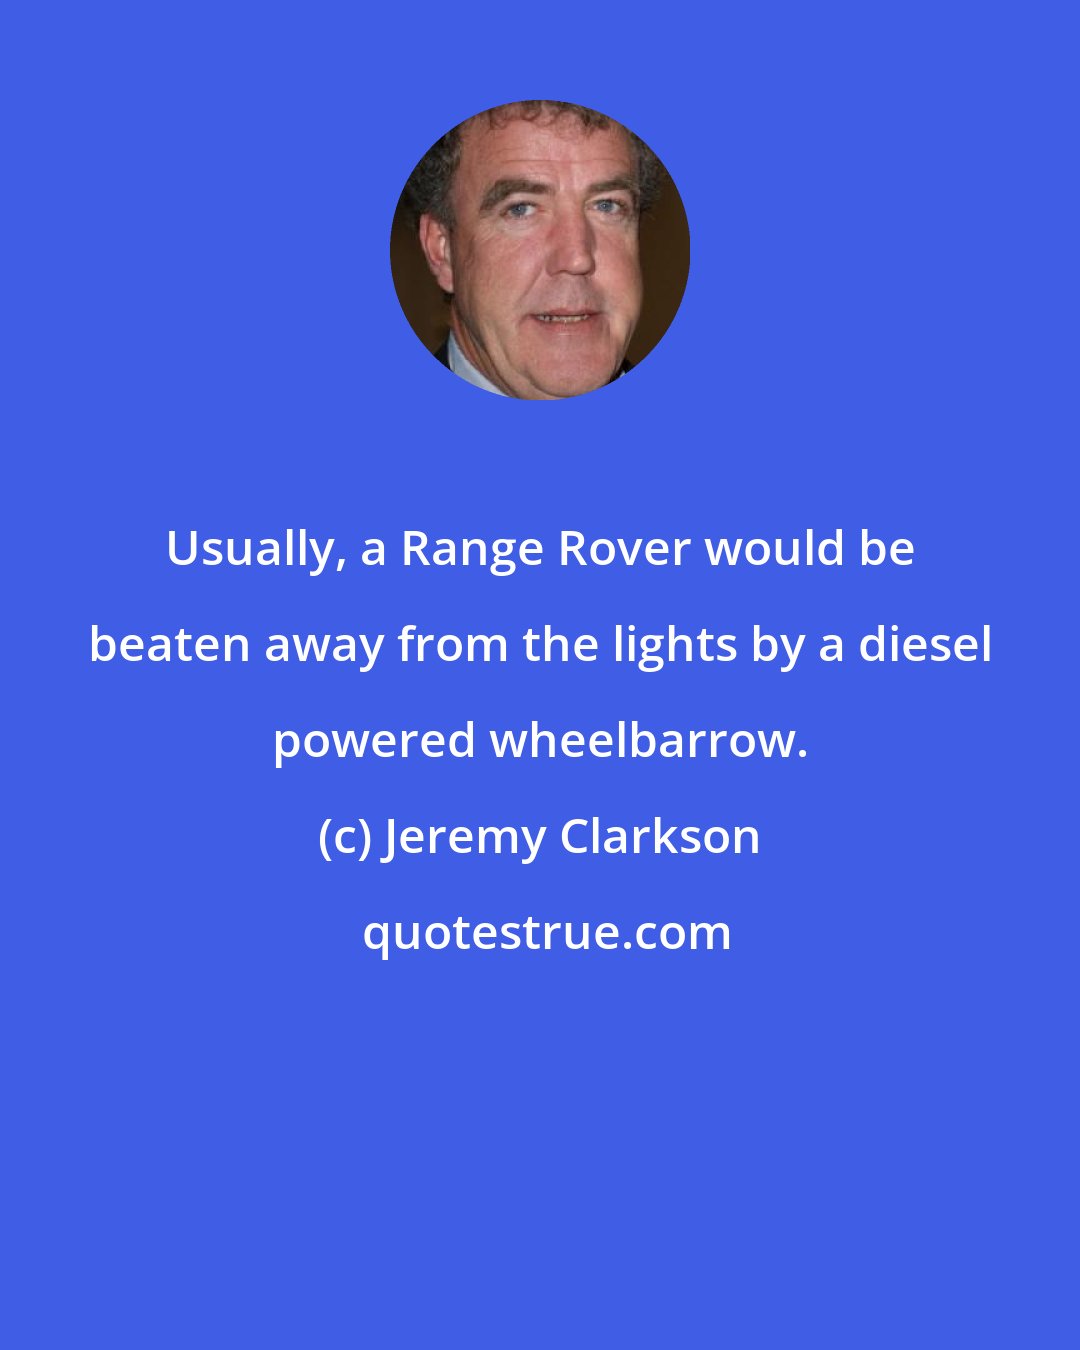 Jeremy Clarkson: Usually, a Range Rover would be beaten away from the lights by a diesel powered wheelbarrow.